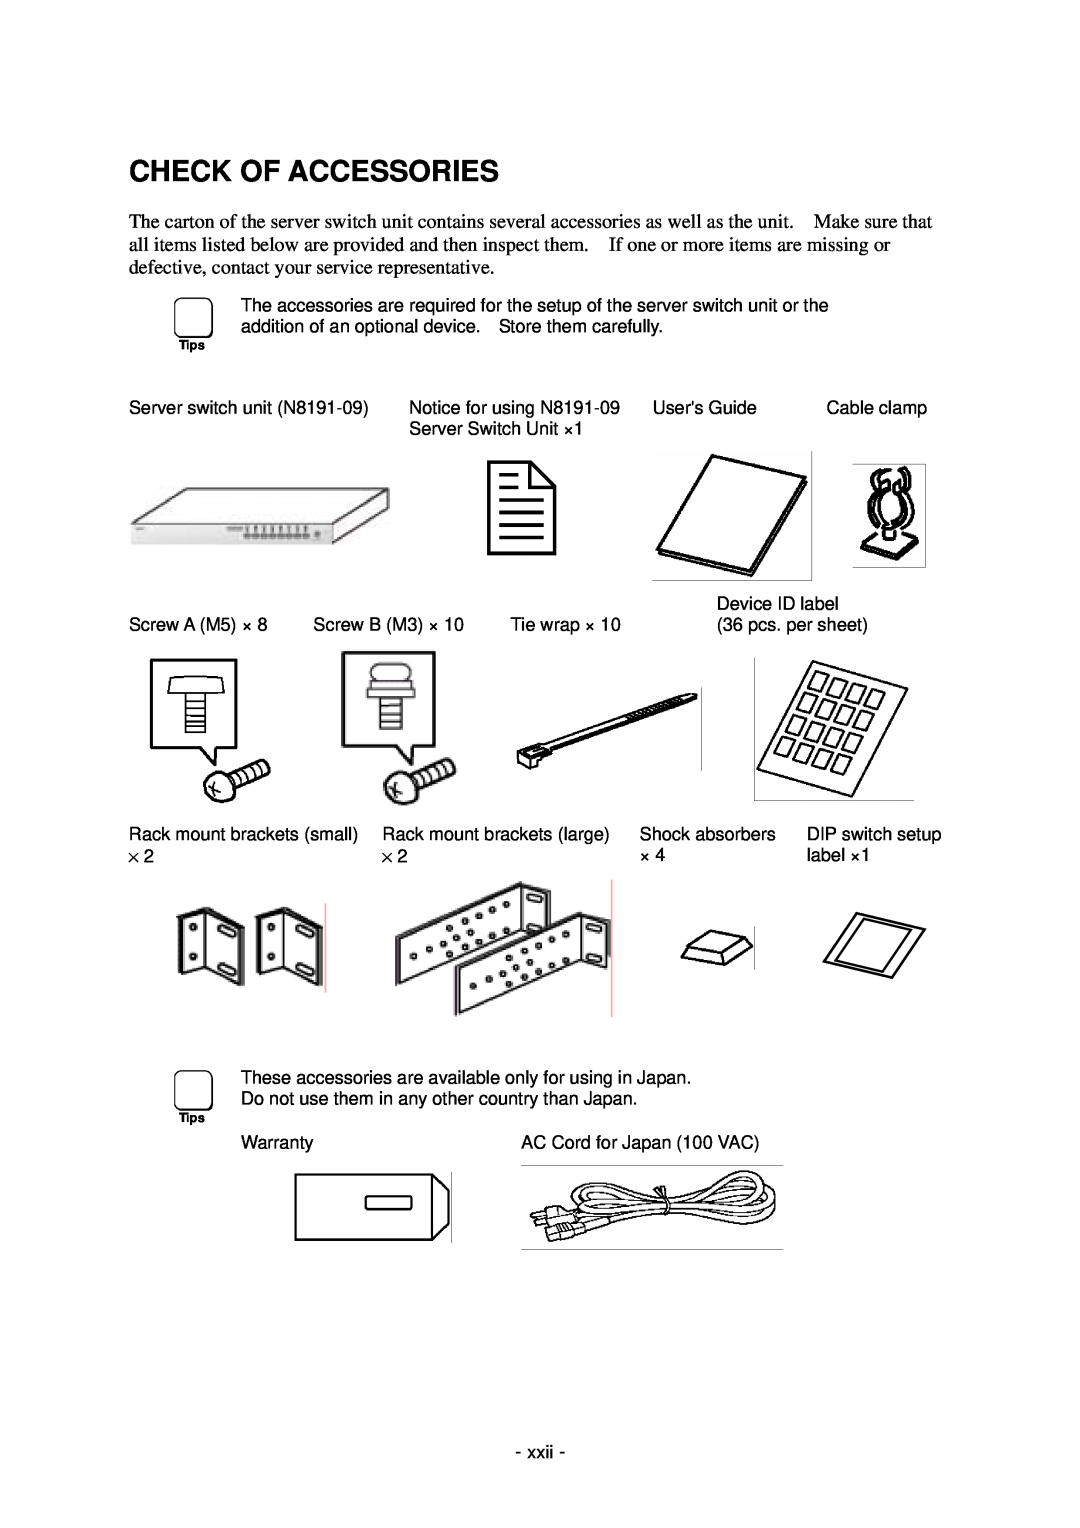 NEC N8191-09 manual Check Of Accessories 